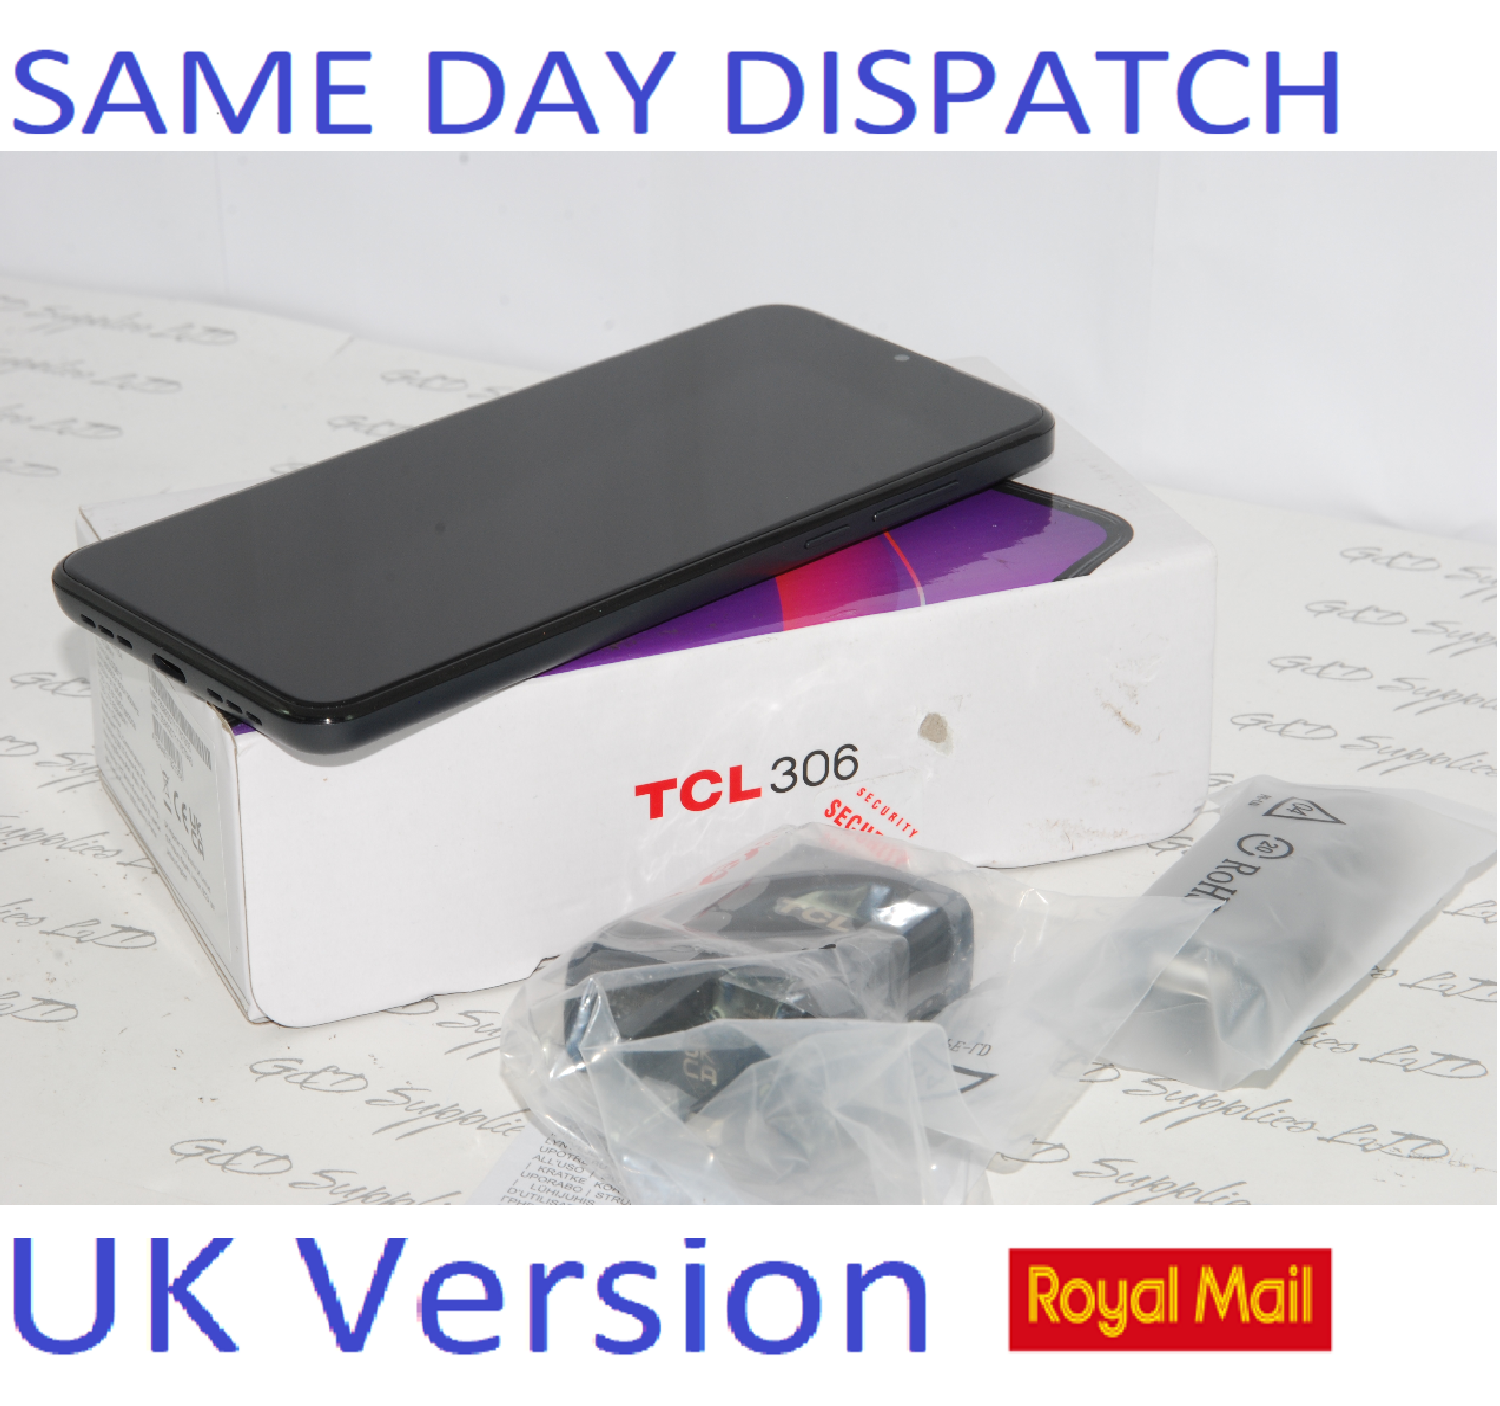 TCL 306 4G 6.5'' Android Smartphone 32GB Unlocked Dual-Sim - Space Grey  UK version #